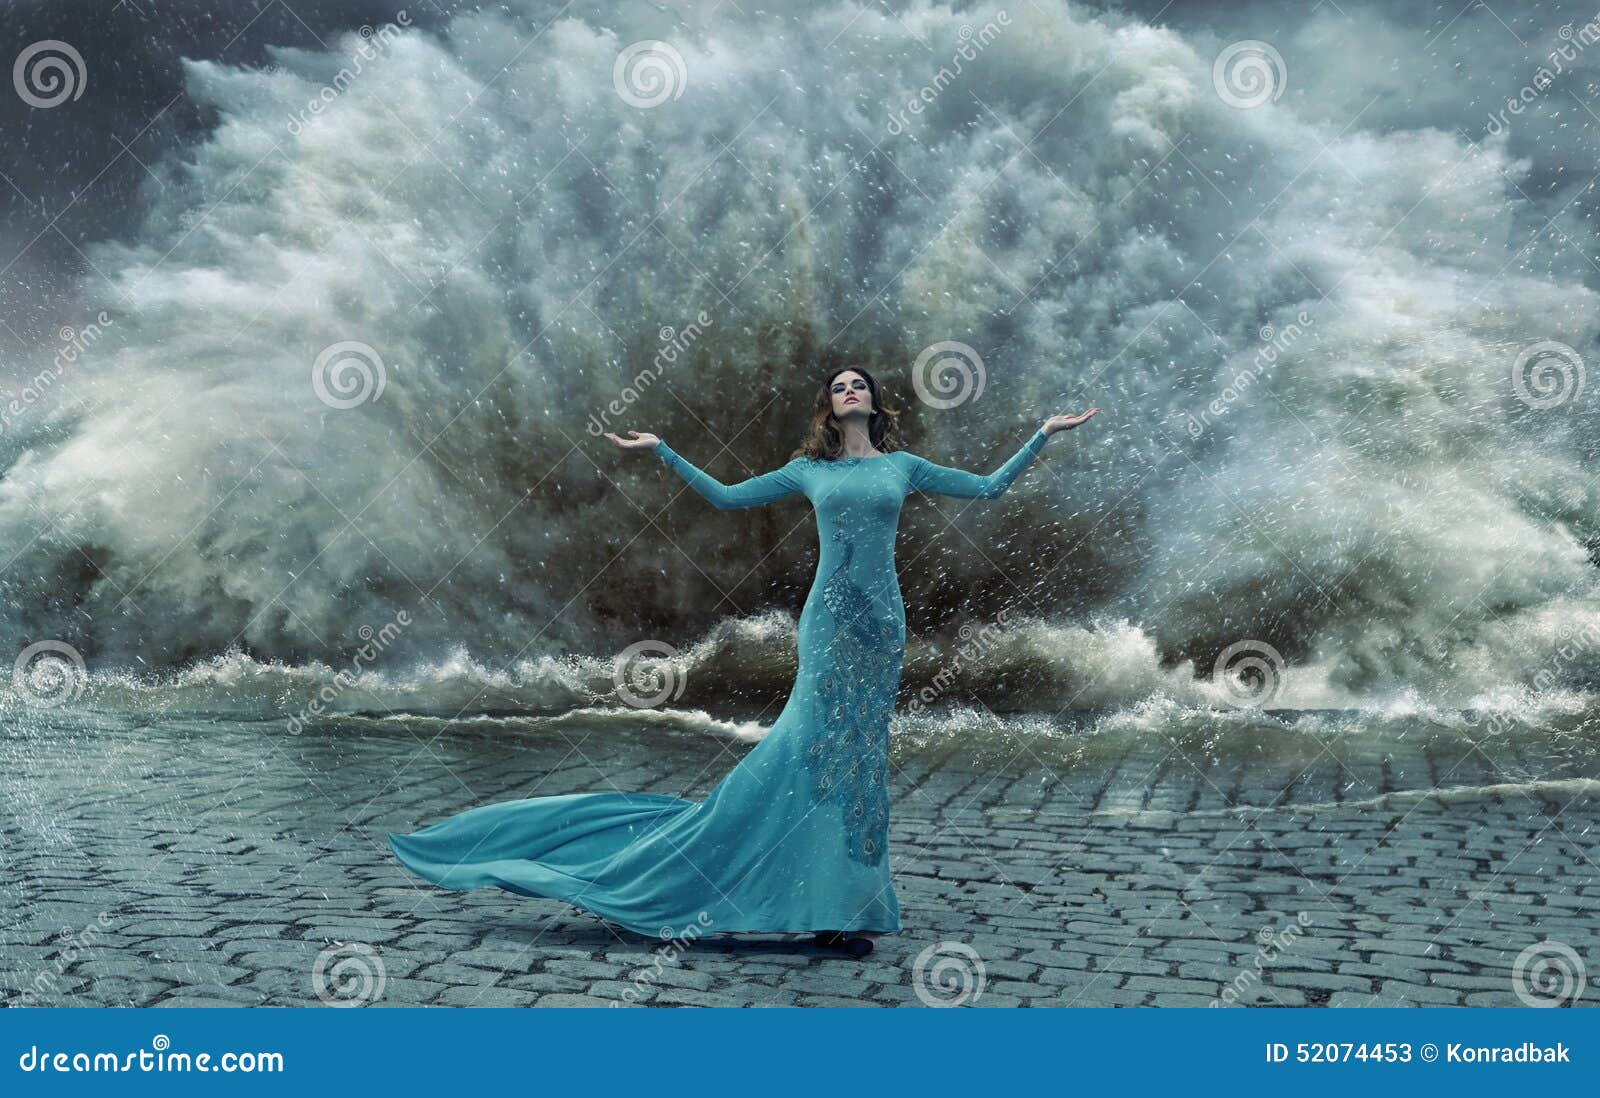 The storm of lady Lady Bhaine